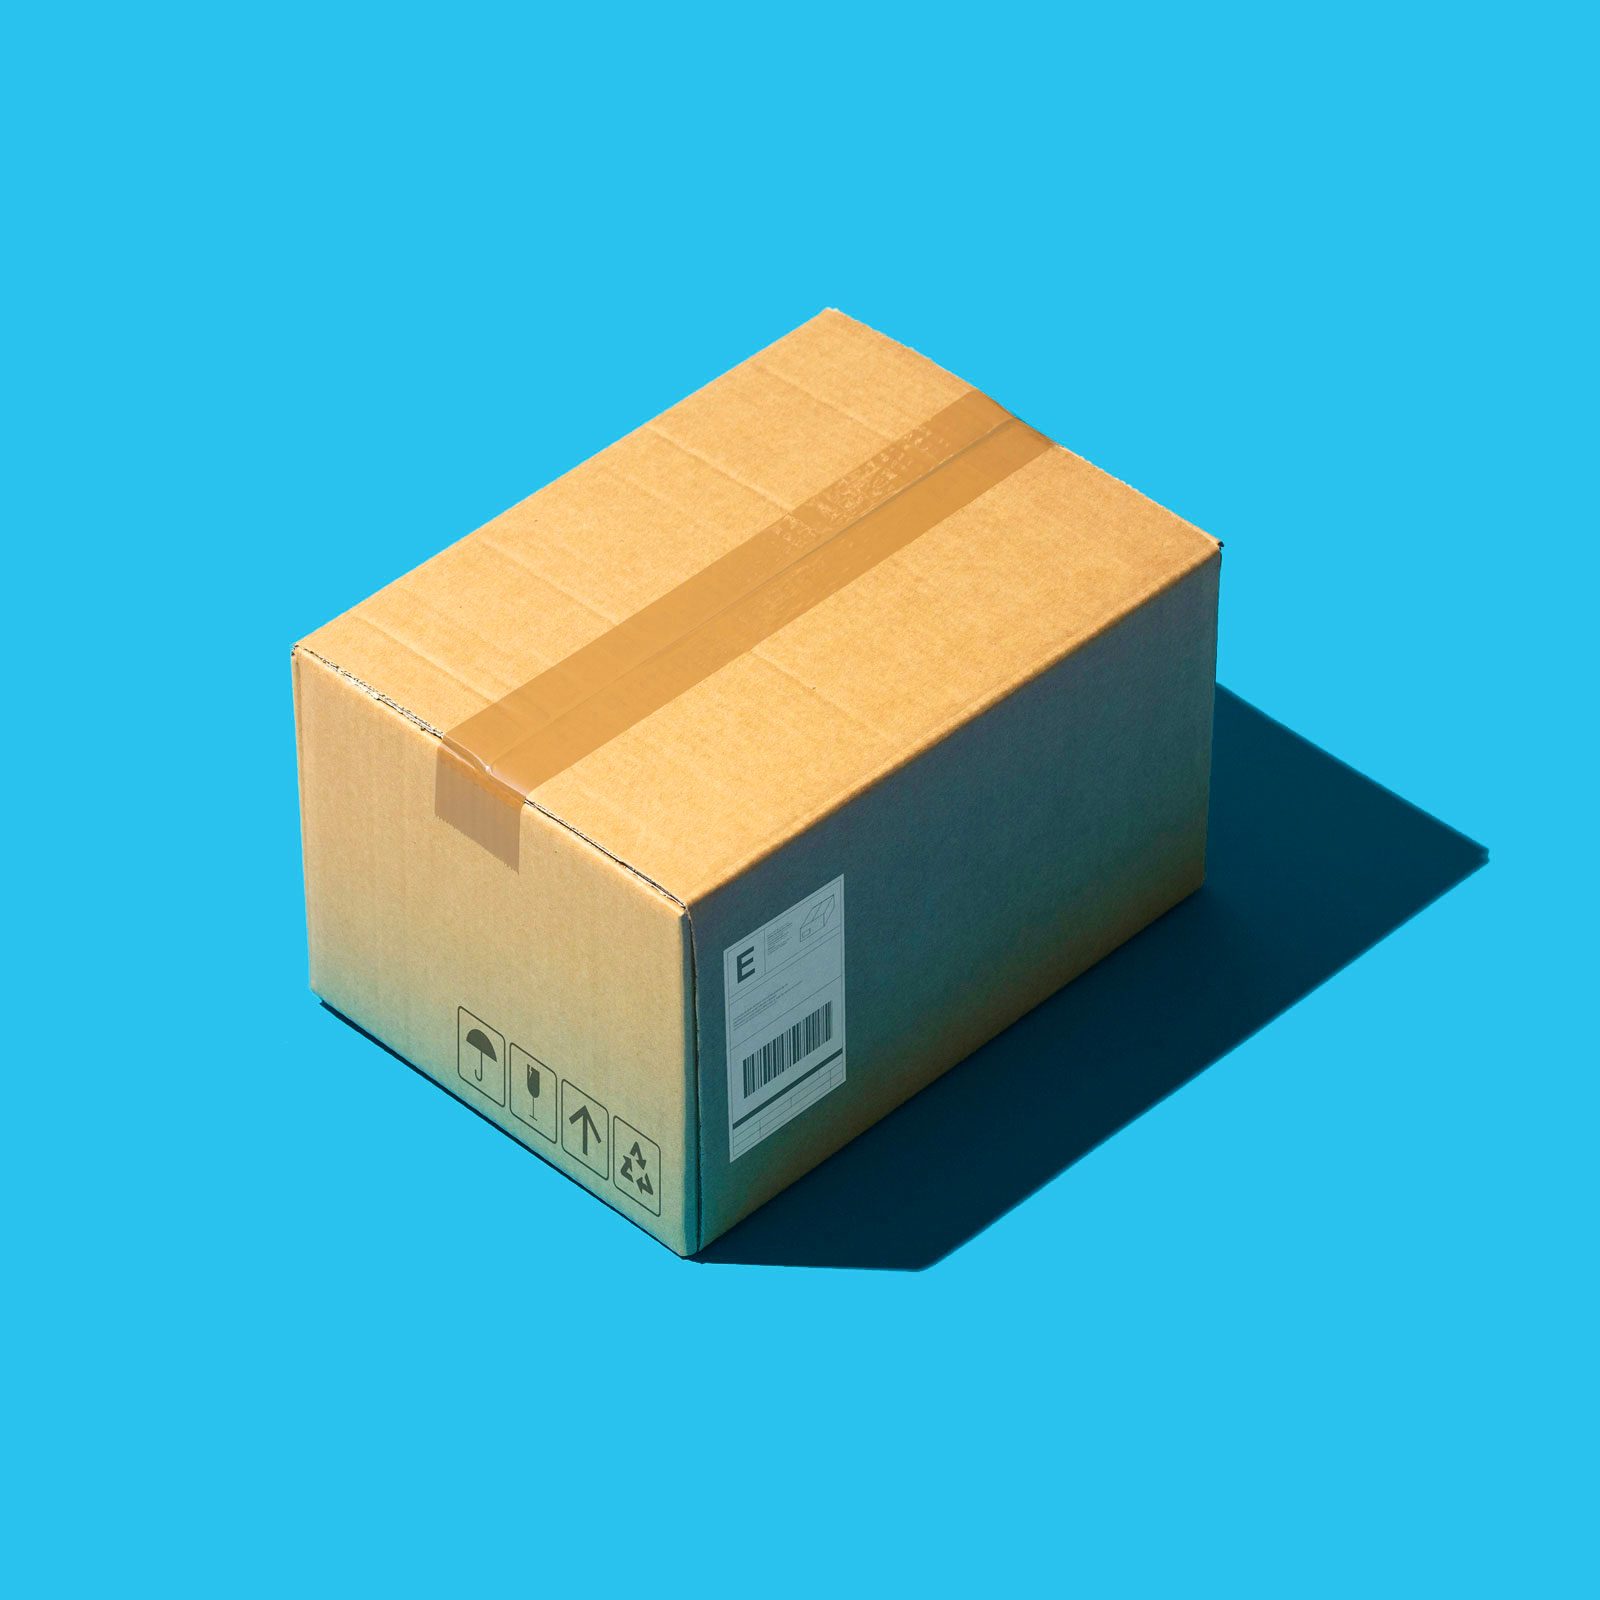 cardboard shipping box on a blue background